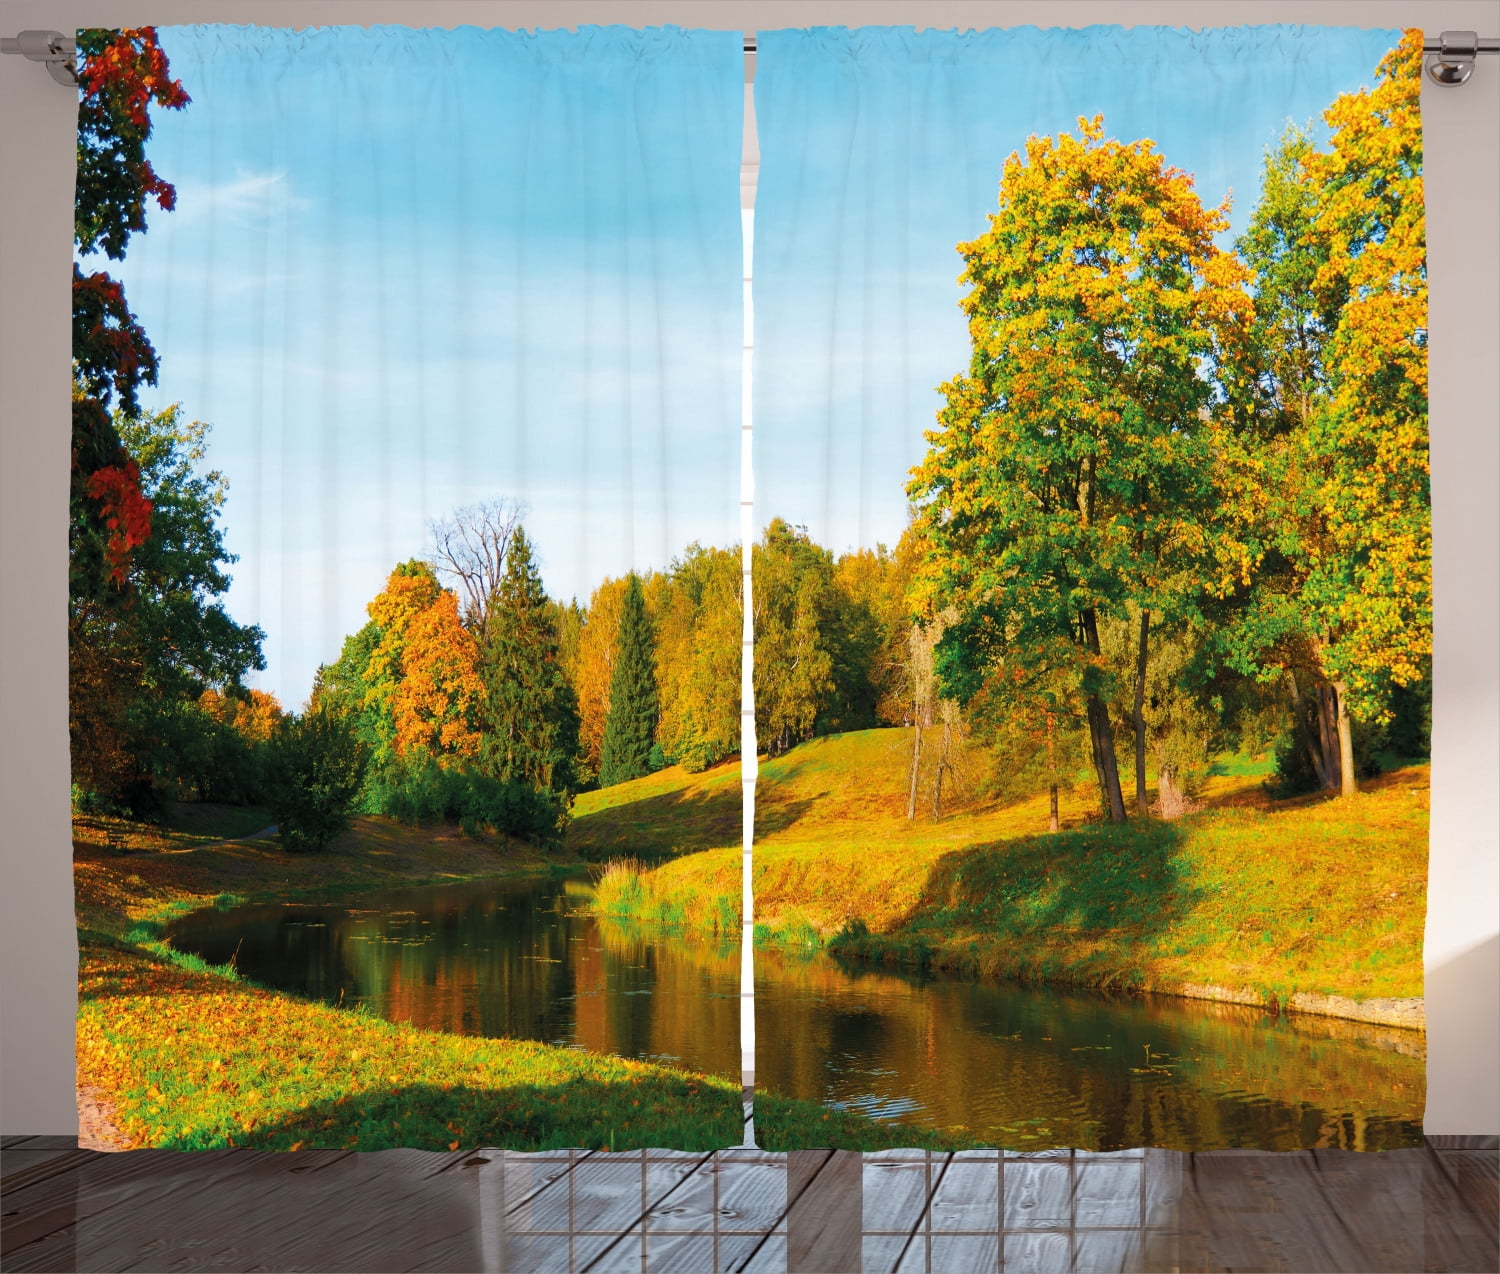 Stones River Trees 3D Blockout Photo Mural Printing Curtains Draps Fabric Window 